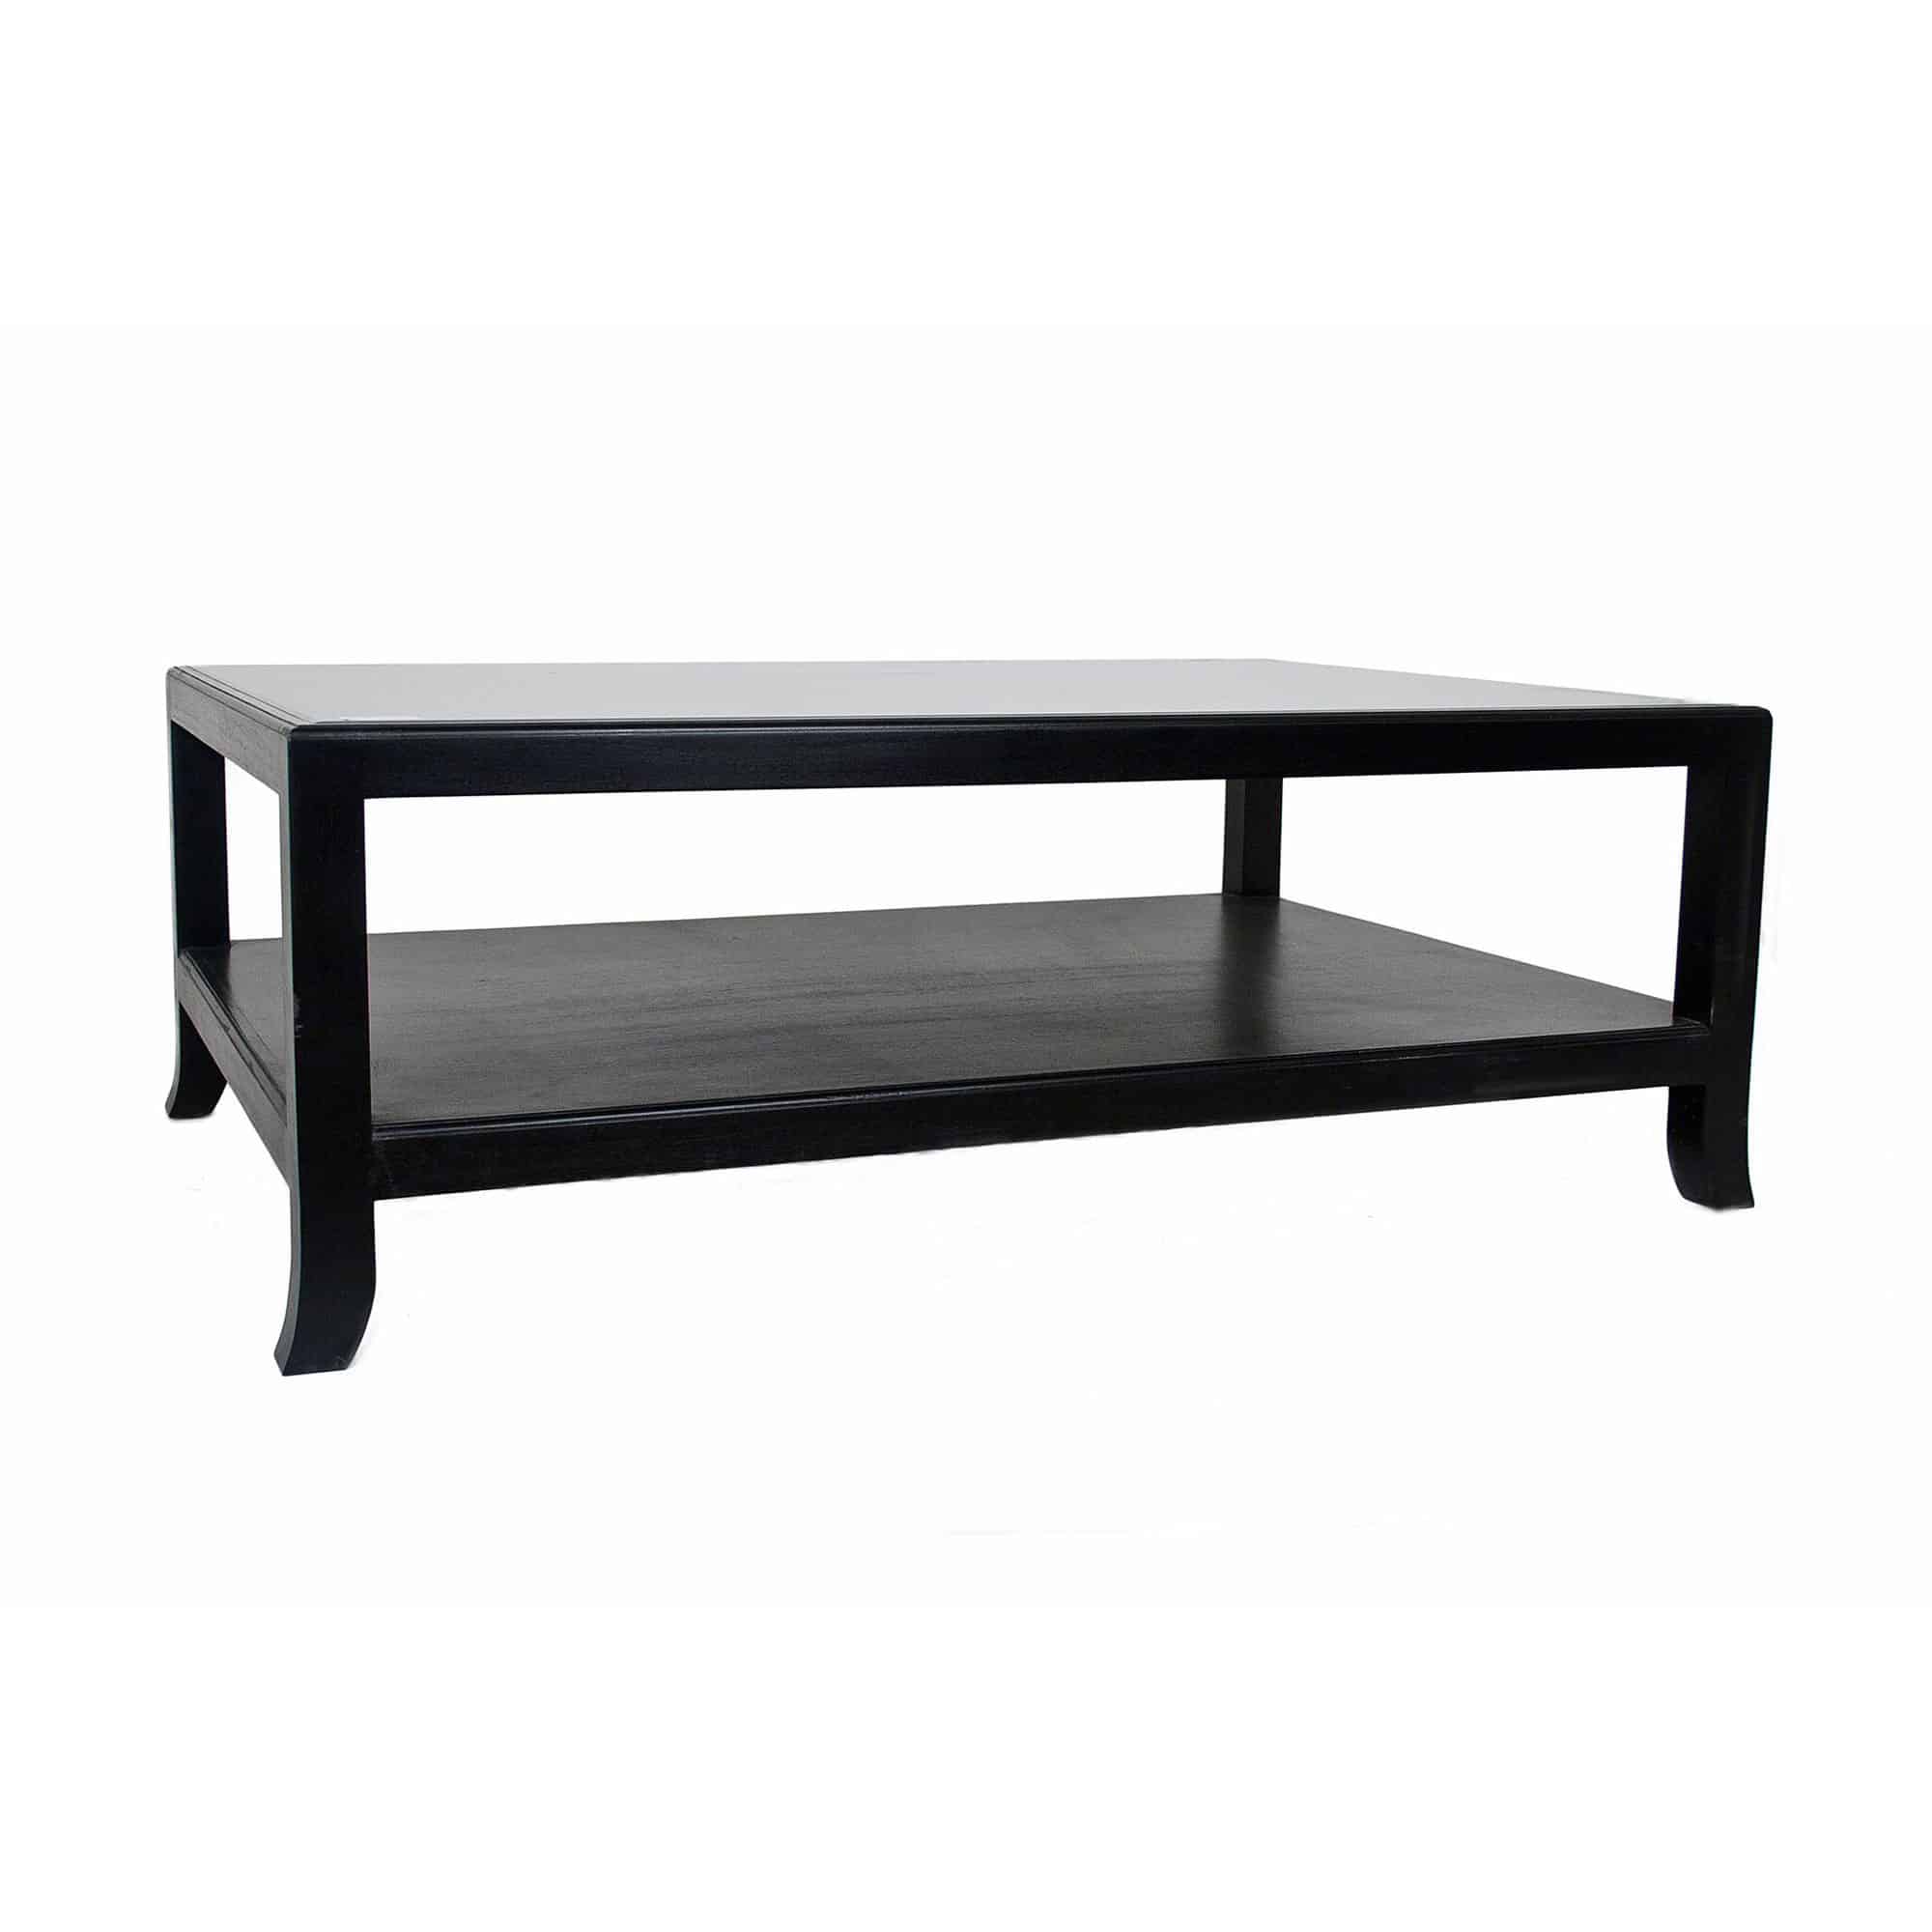 Modena coffee table with black glass top